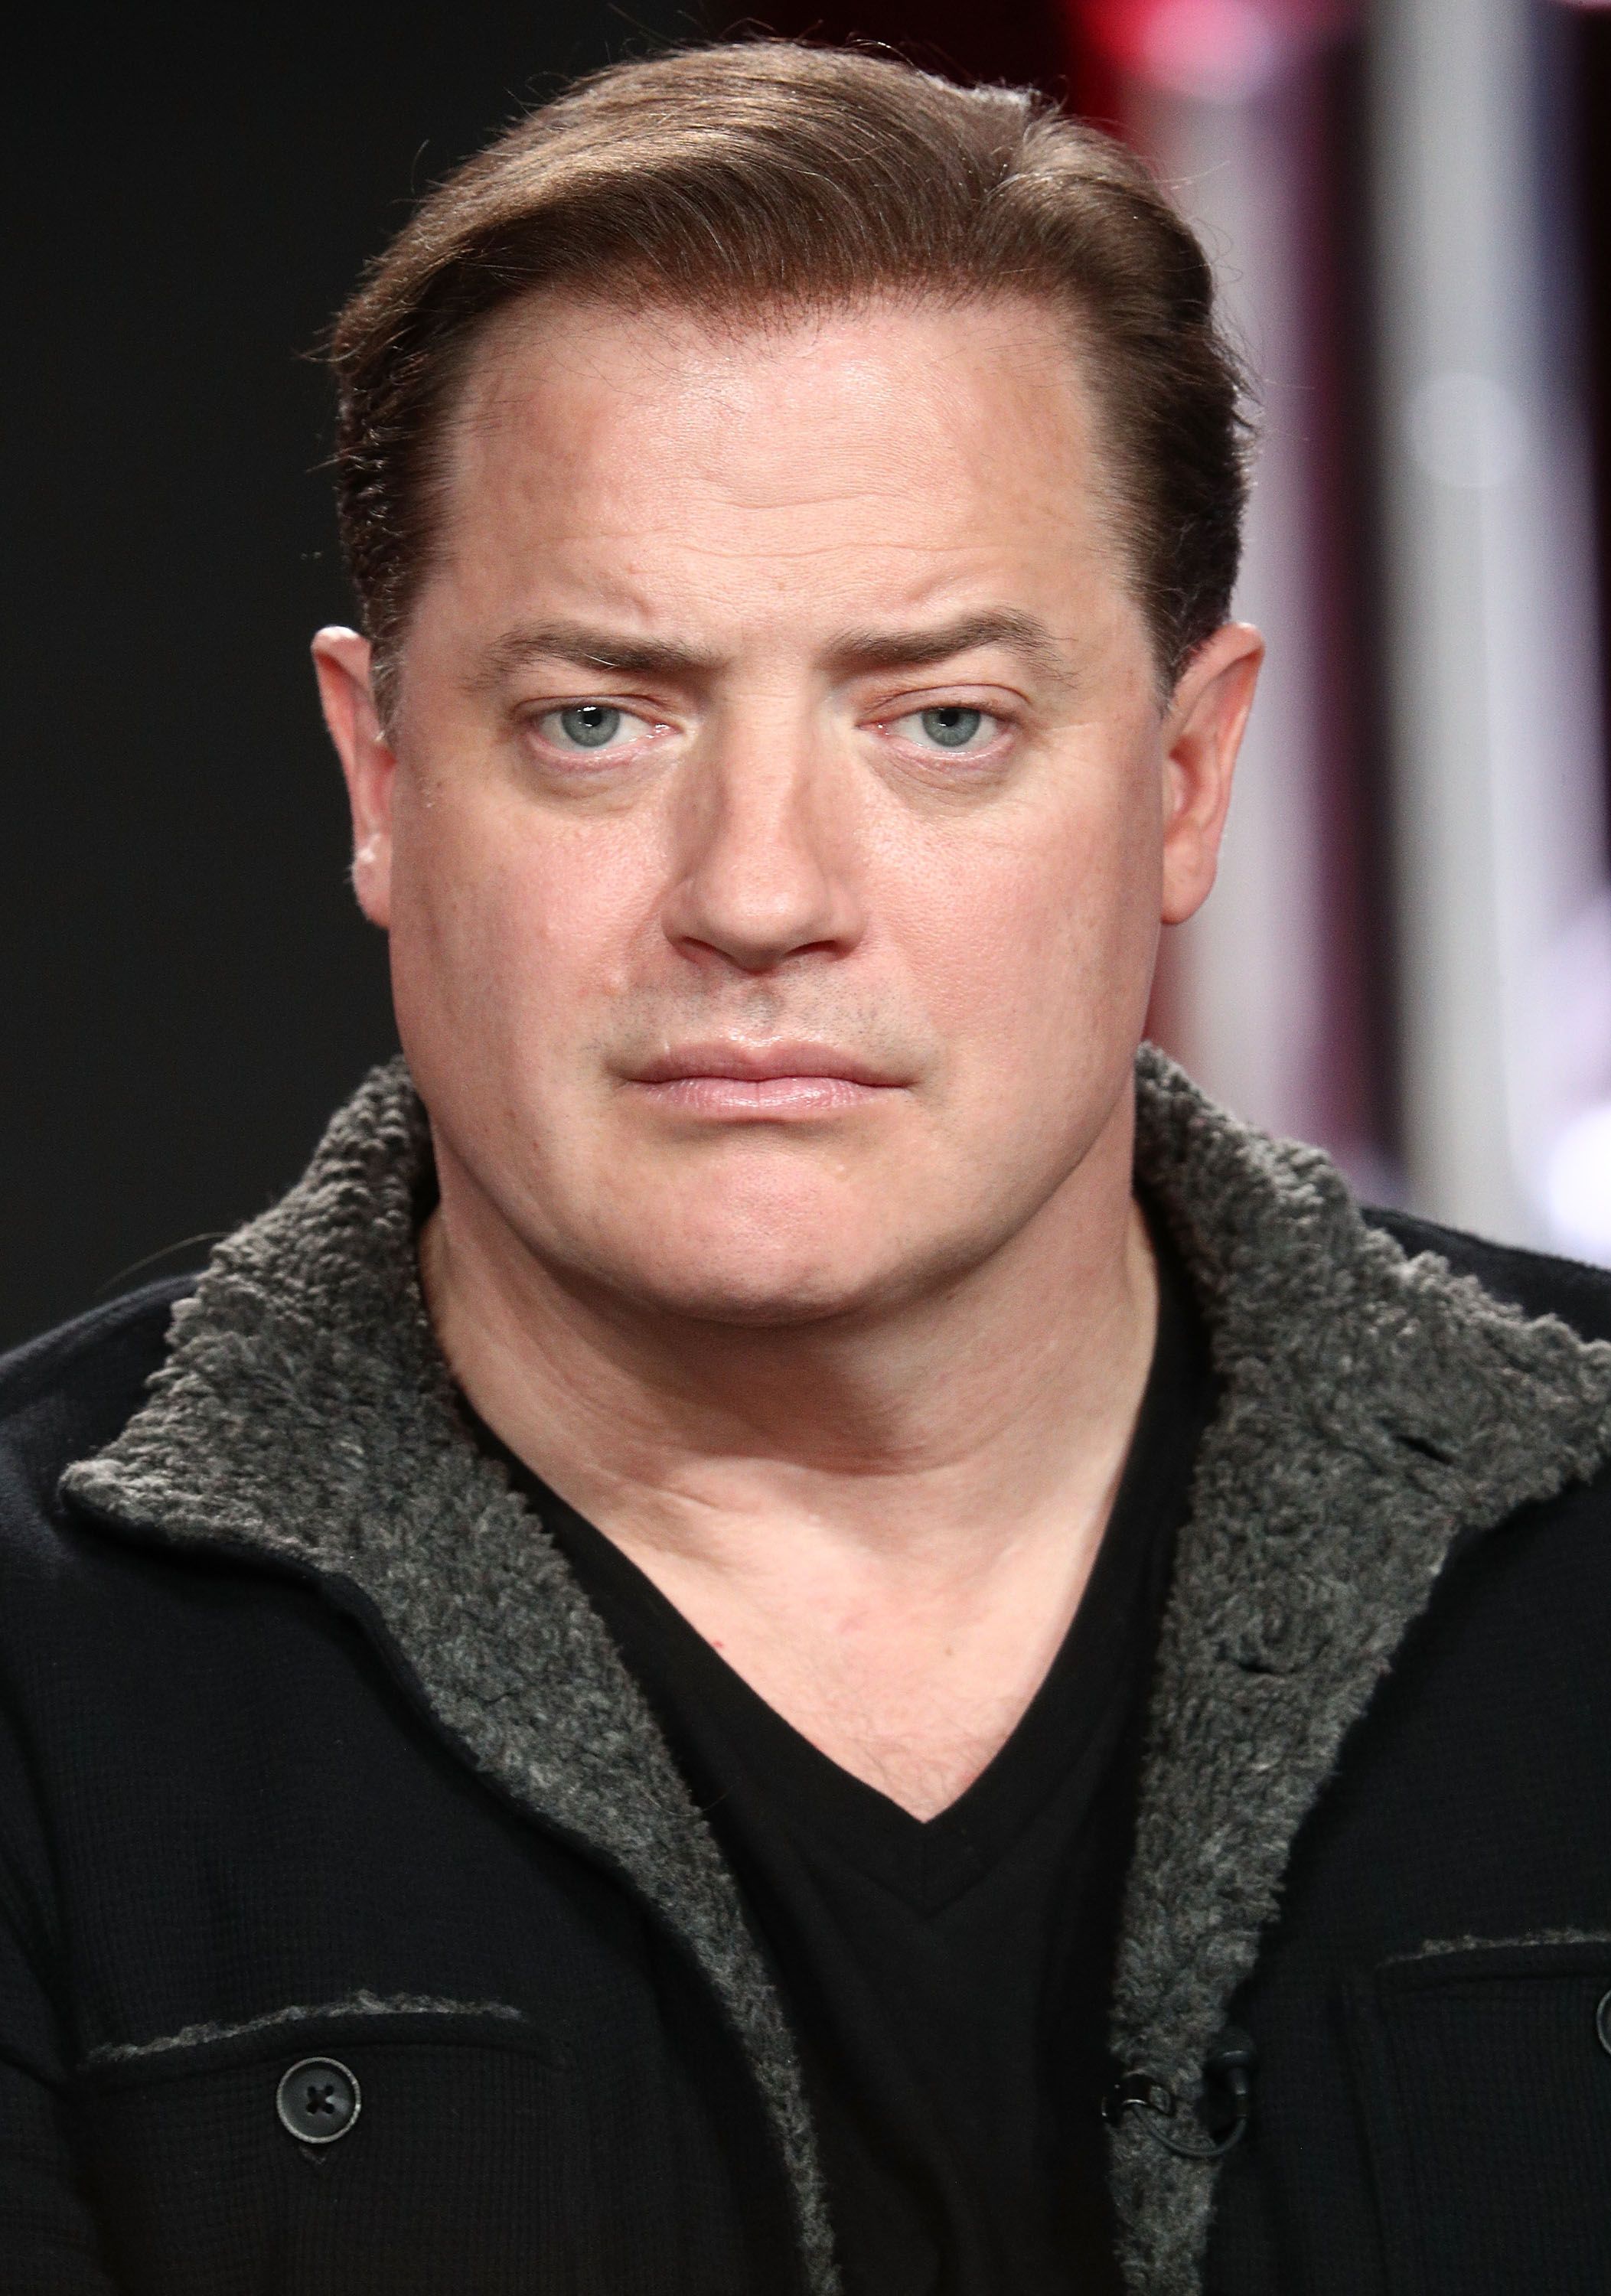  Brendan Fraser at the AT&T Audience Network portion of the 2018 Winter Television Critics Association Press Tour at The Langham Huntington, Pasadena on January 11, 2018 in Pasadena, California. | Source: Getty Images